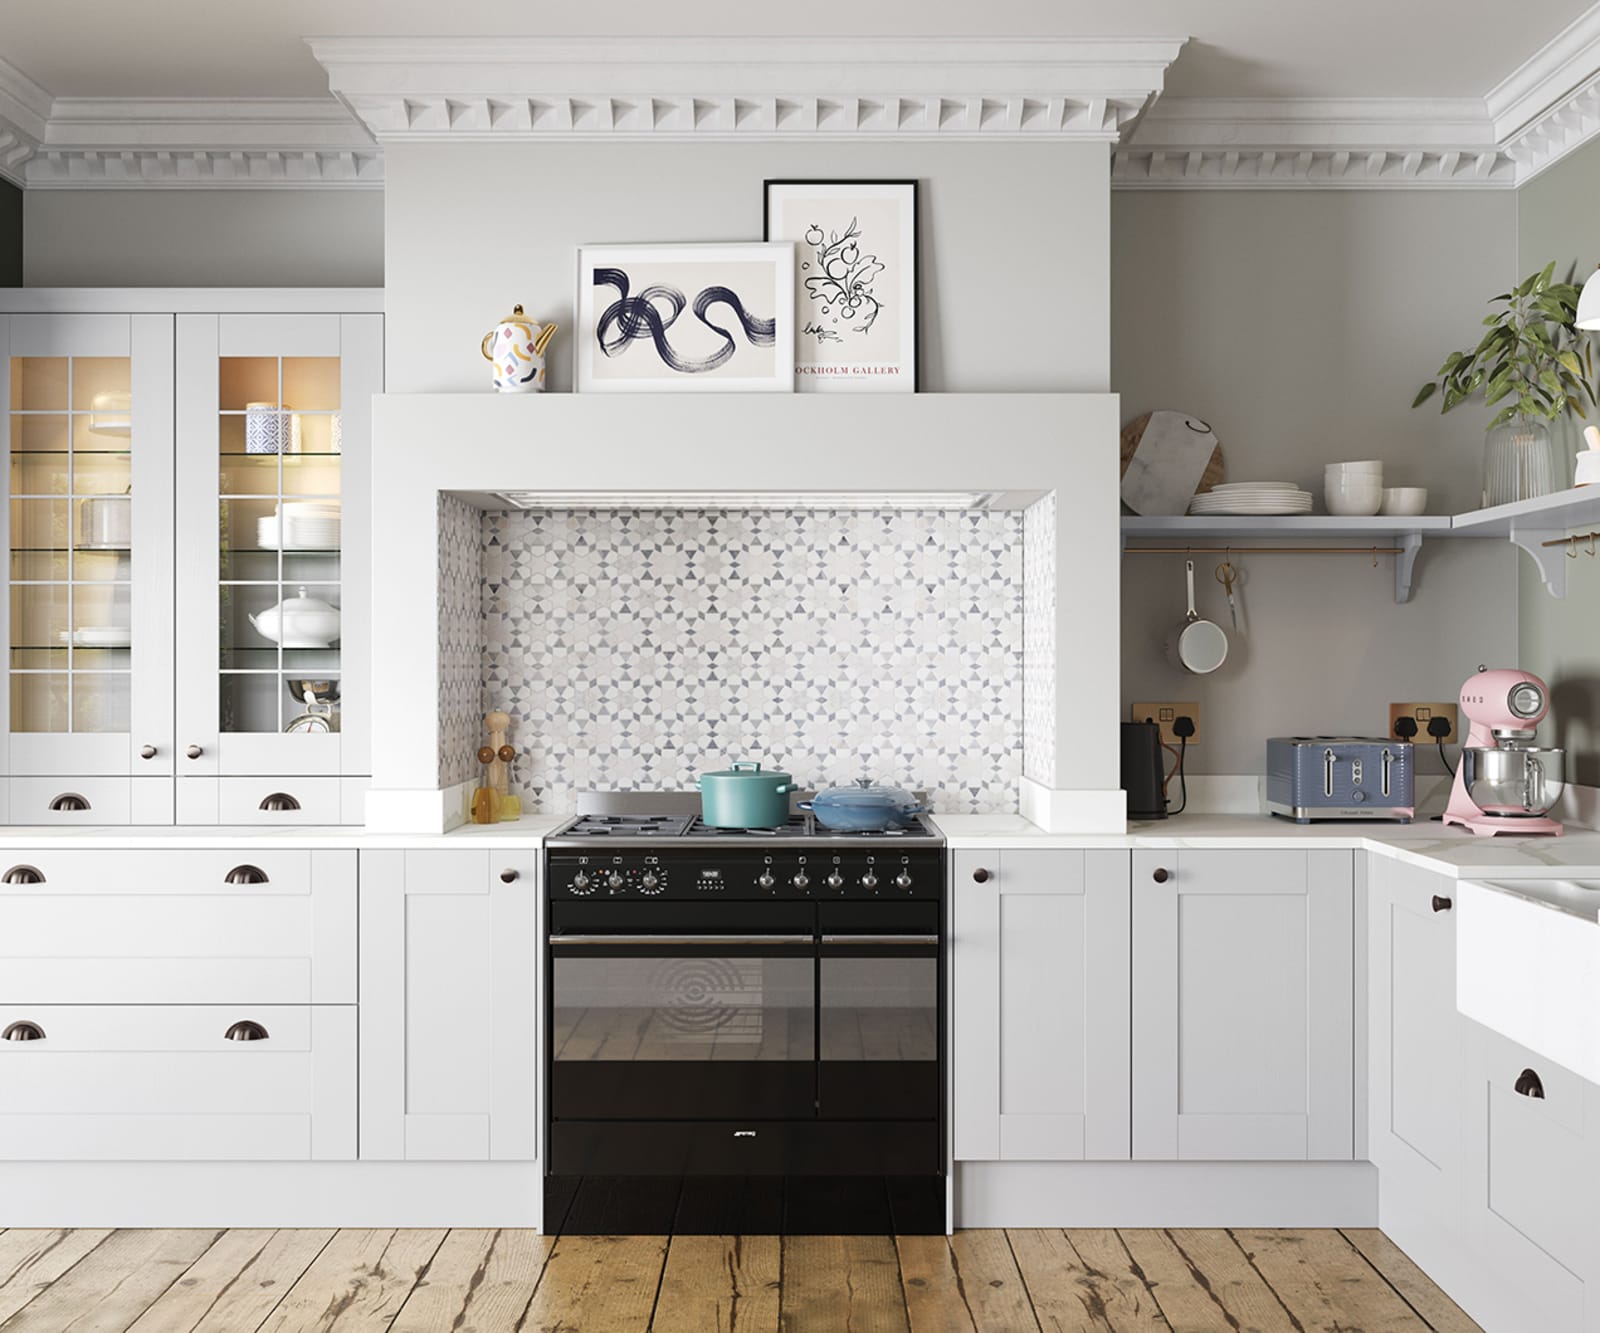 Winchester Dove grey, the wood grain effect affordable traditional kitchen by Magnet, with display cabinets.